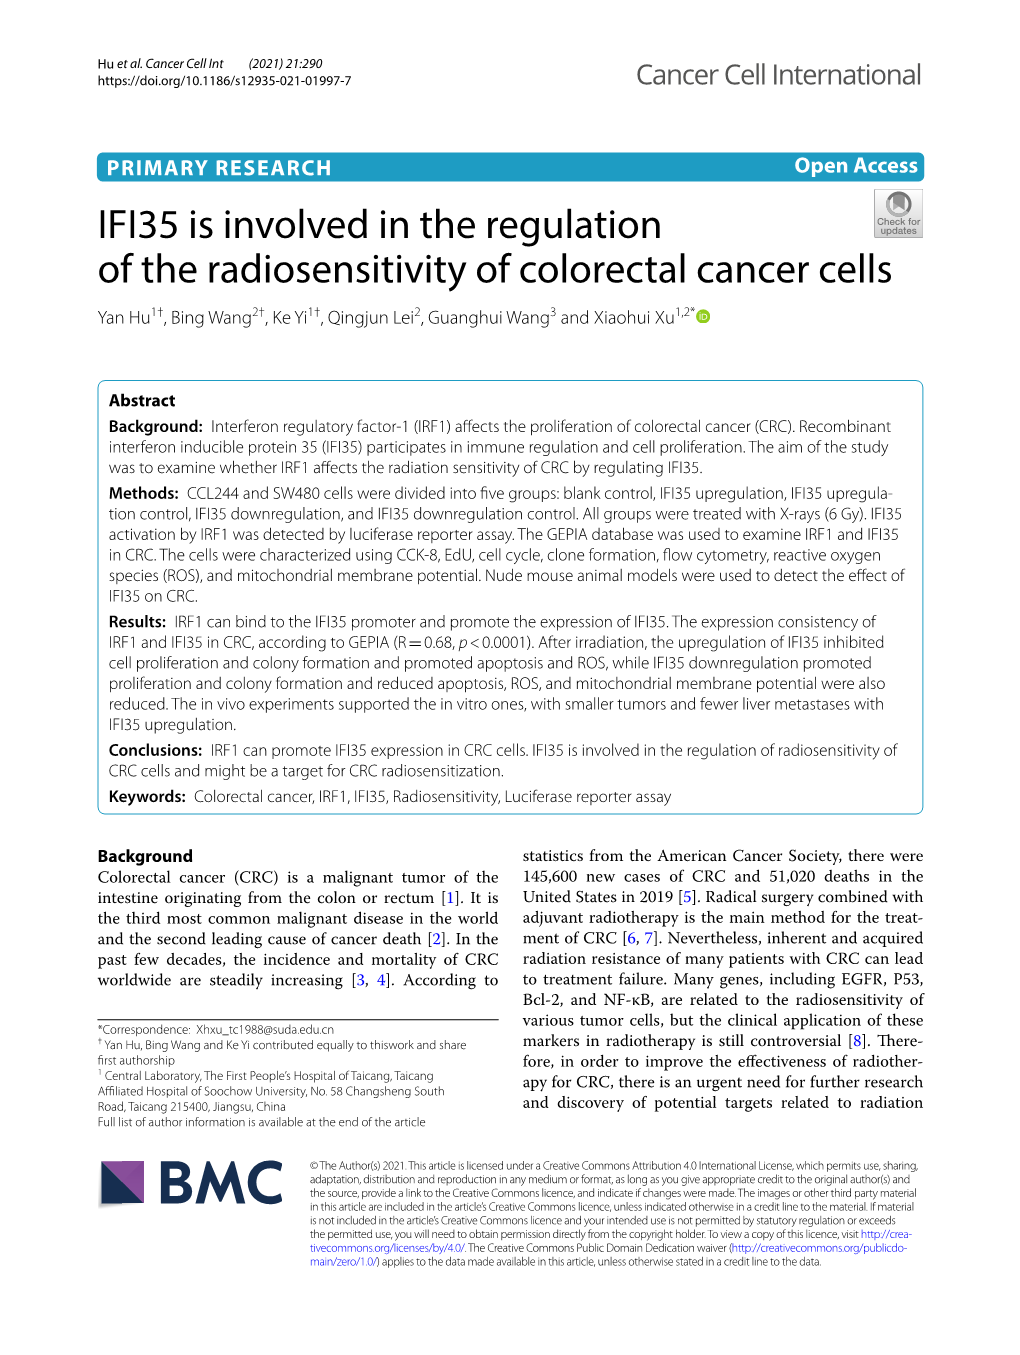 IFI35 Is Involved in the Regulation of the Radiosensitivity of Colorectal